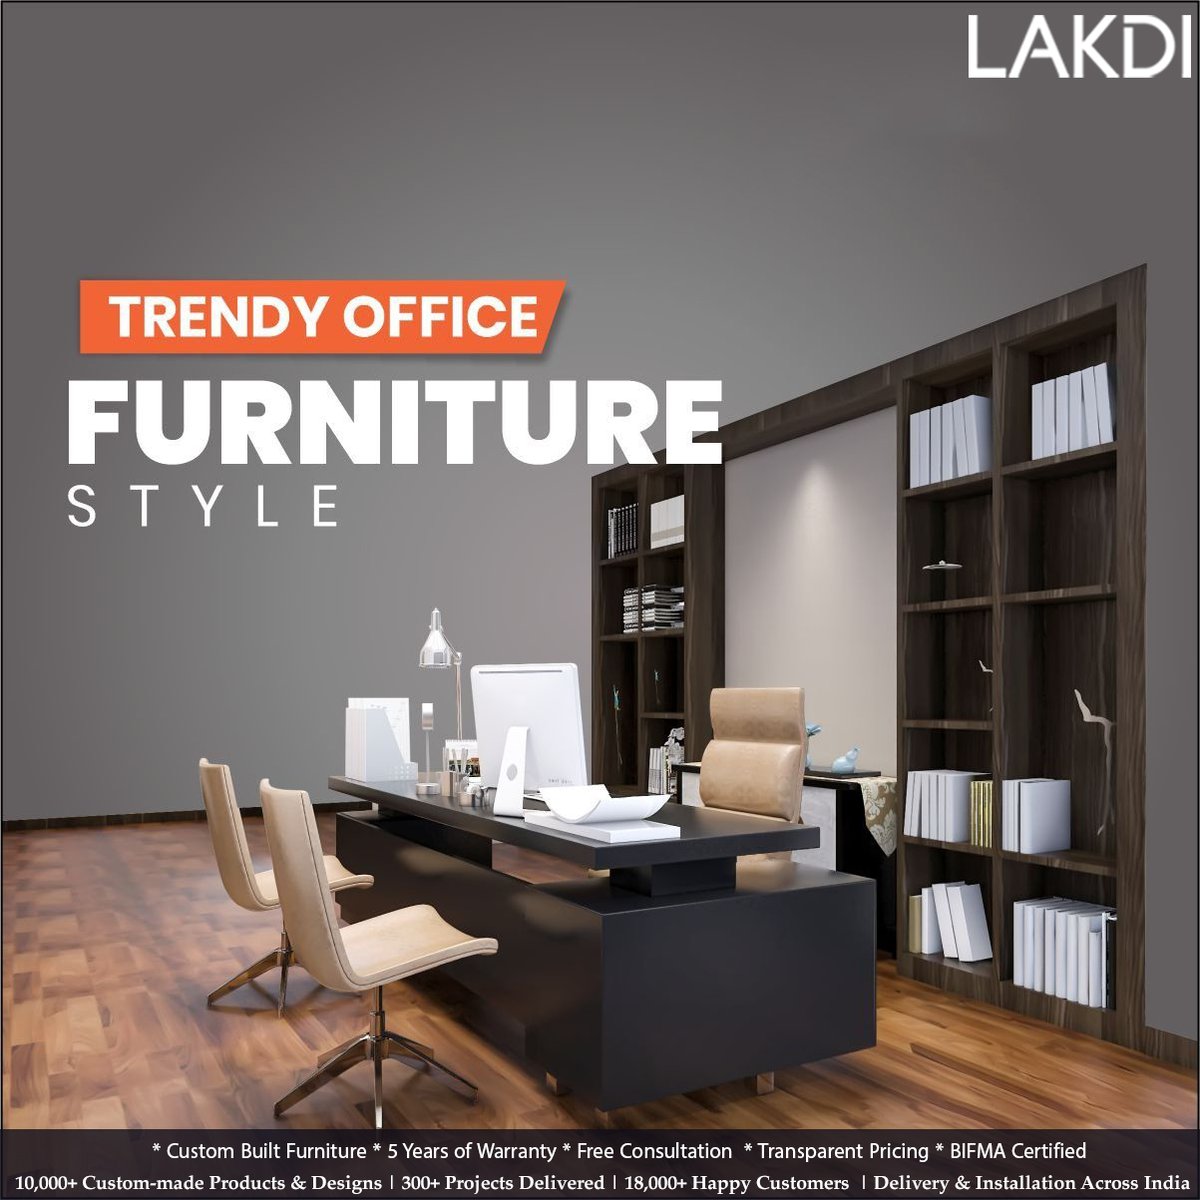 Transform your workspace with modern, functional office furniture.

#officefurniture #furnituredesign #furniture #officedecor #officedesign #OfficeDesk #officechair #officechair #interiordesign #interiors #interiorstyling #officeinterior #officeinteriordesign